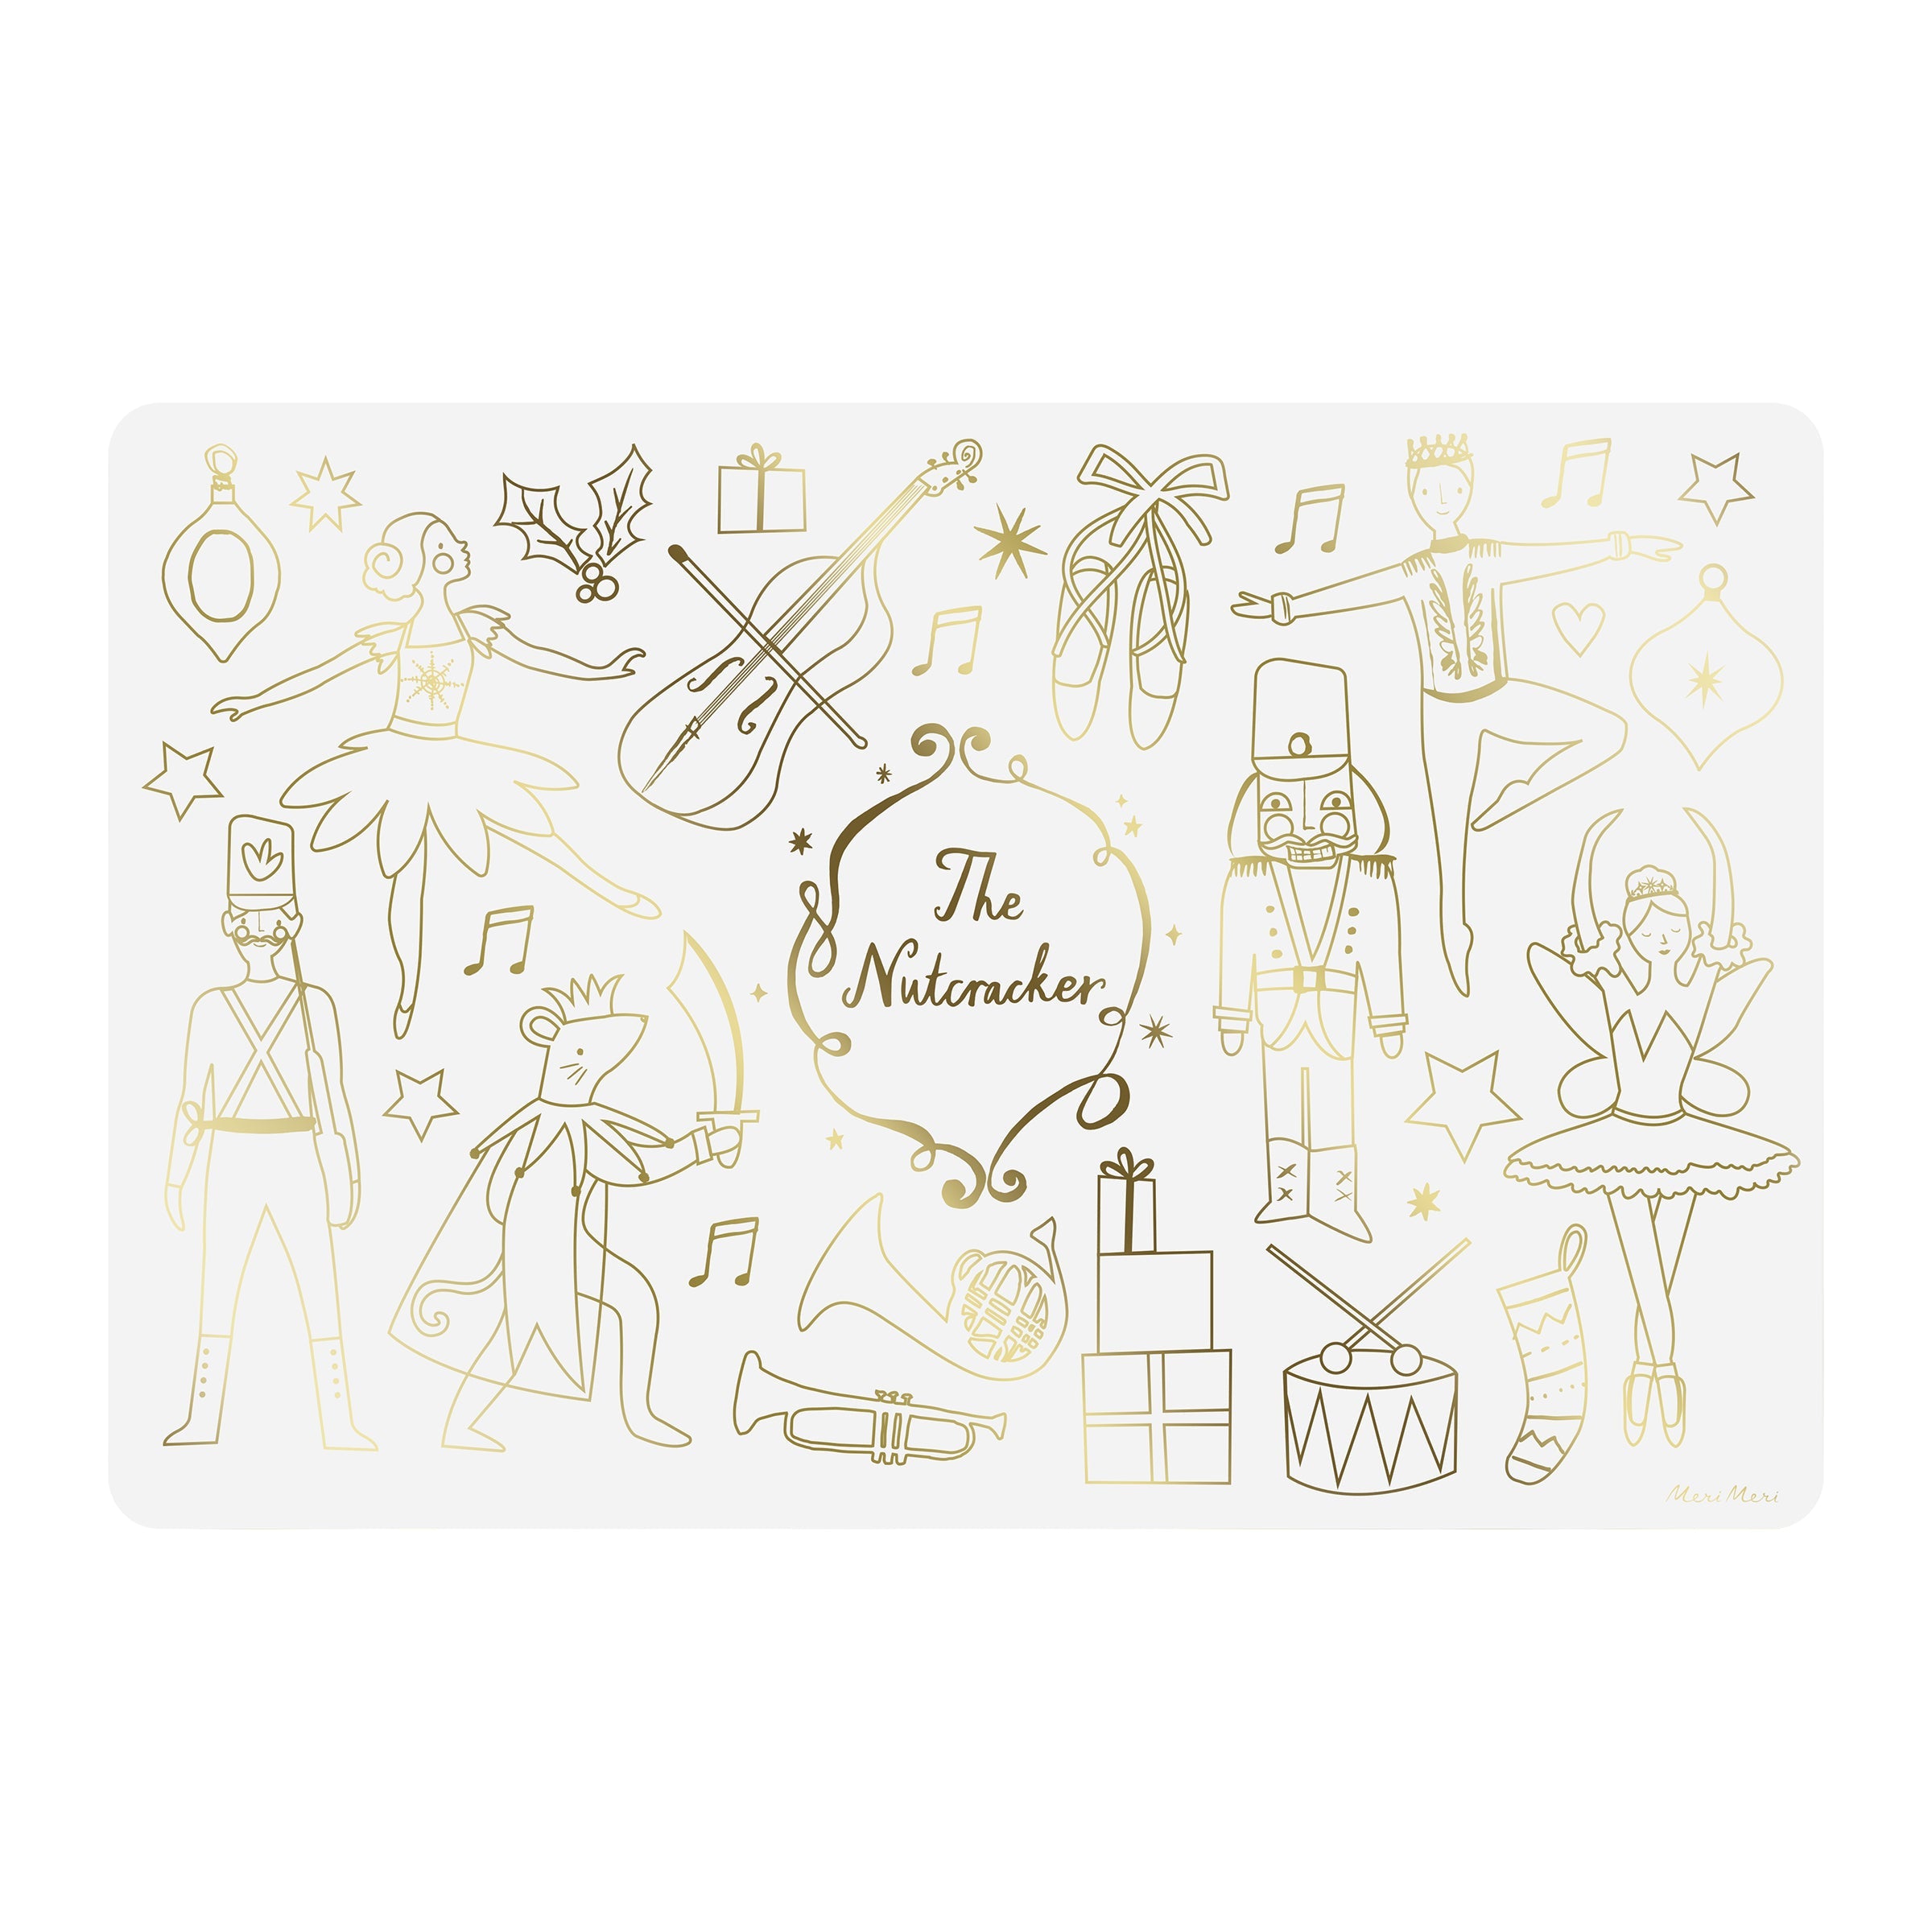 Our Christmas place mats, with Nutrcracker designs, are perfect for creative fun.